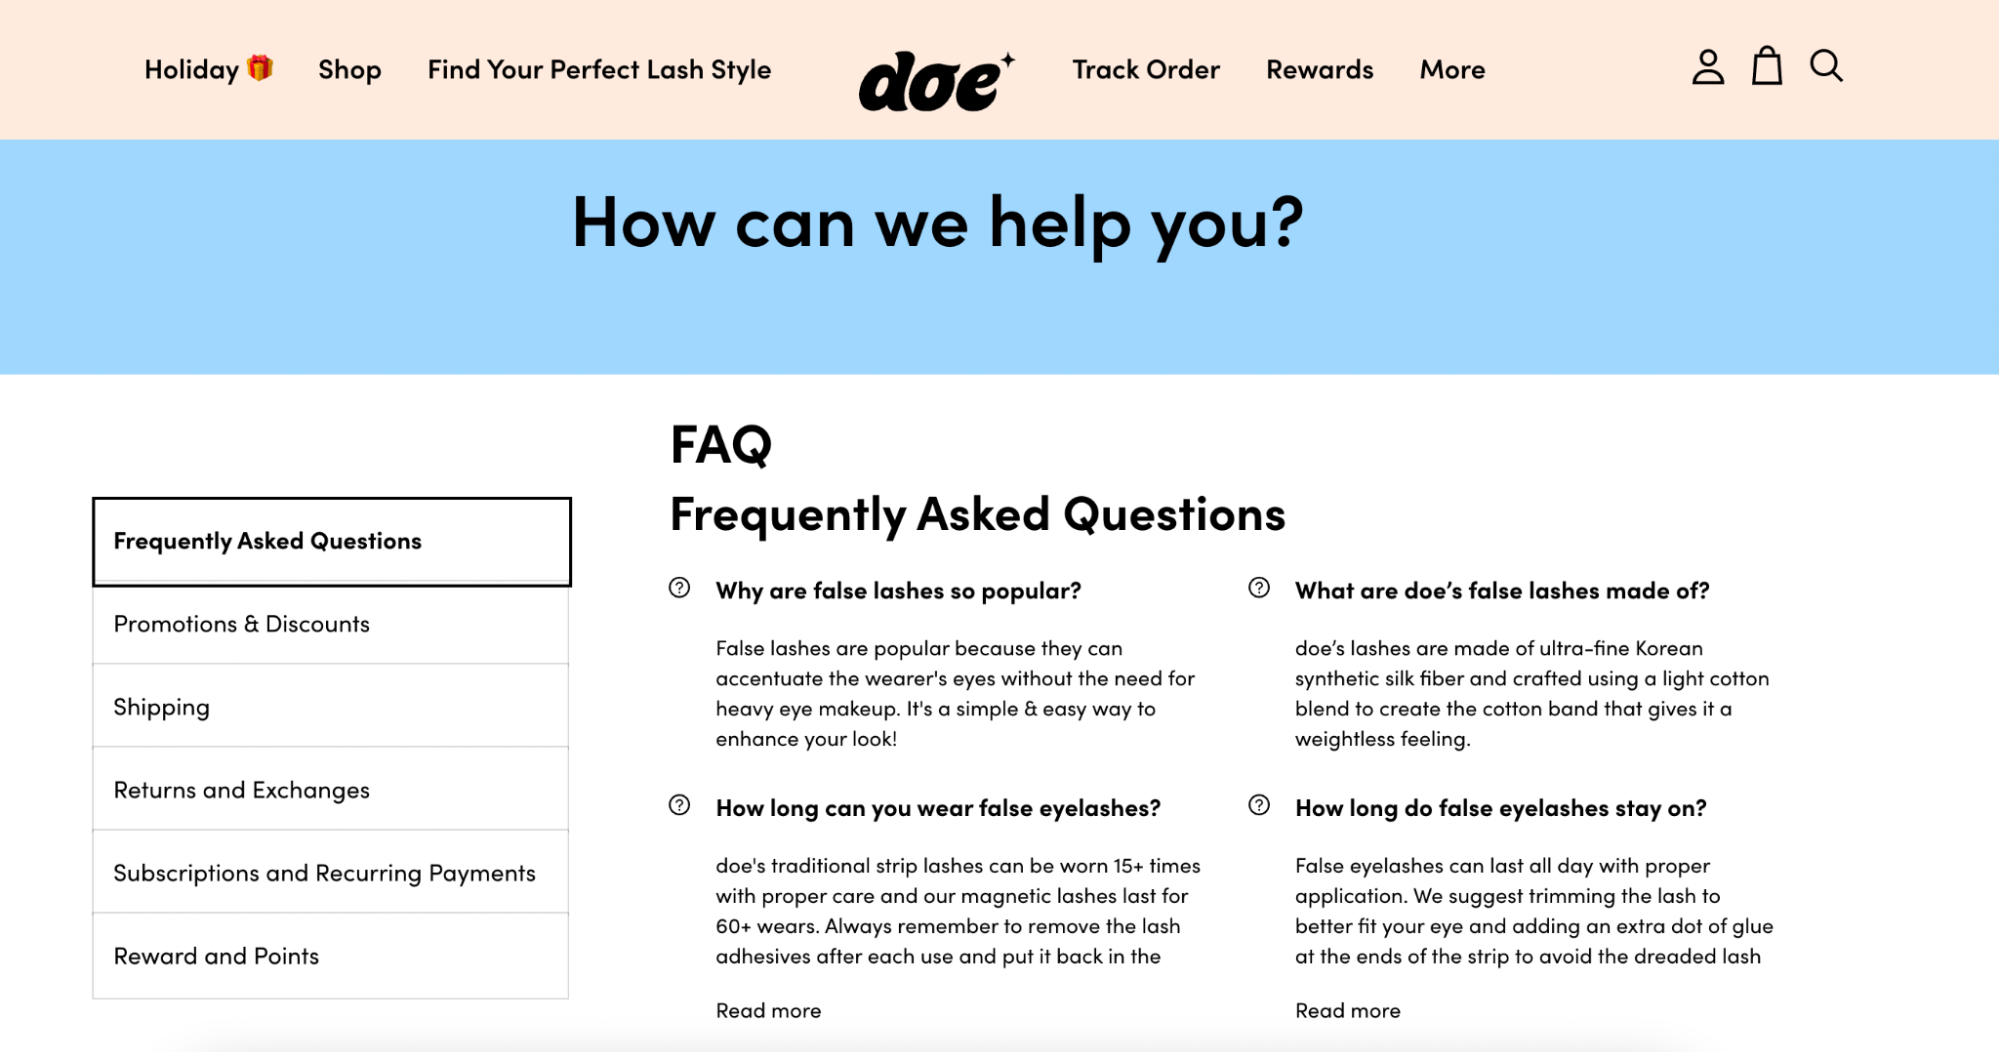 Screenshot of Doe Lashes’ help center which answers questions like “Why are false eyelashes so popular?” and “What are Doe’s false lashes made of?” 